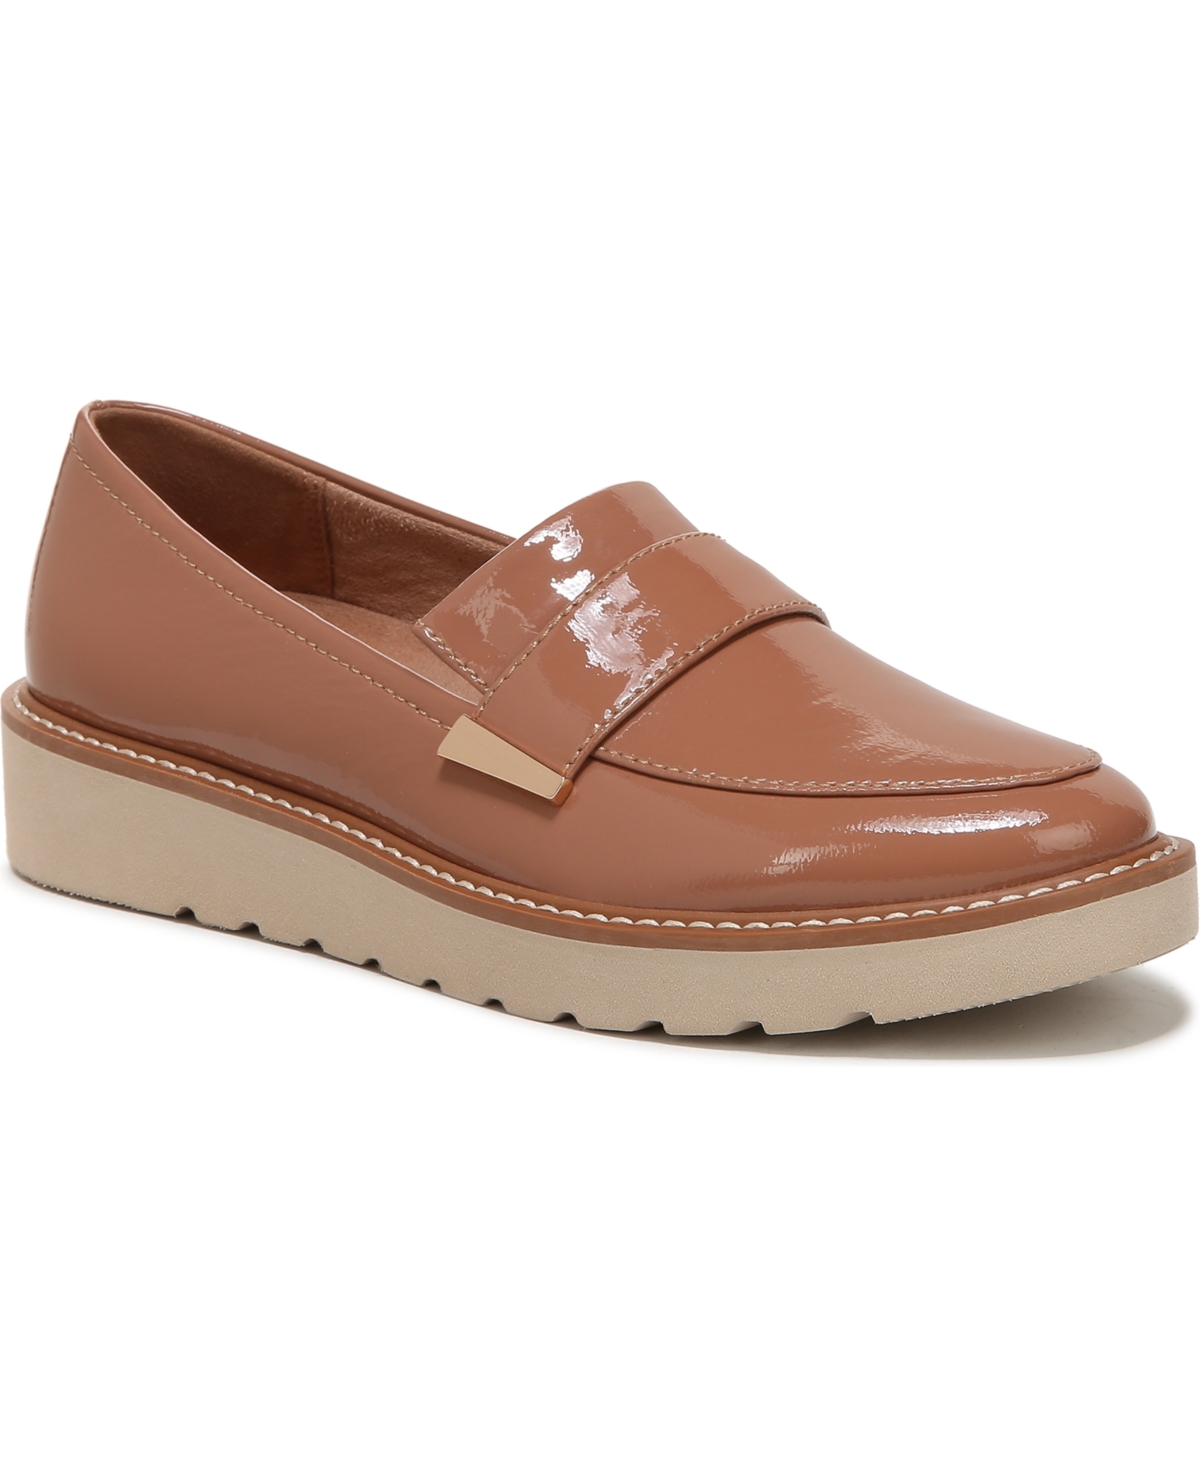 Adiline Lug Sole Loafers - Cappuccino Brown Leather